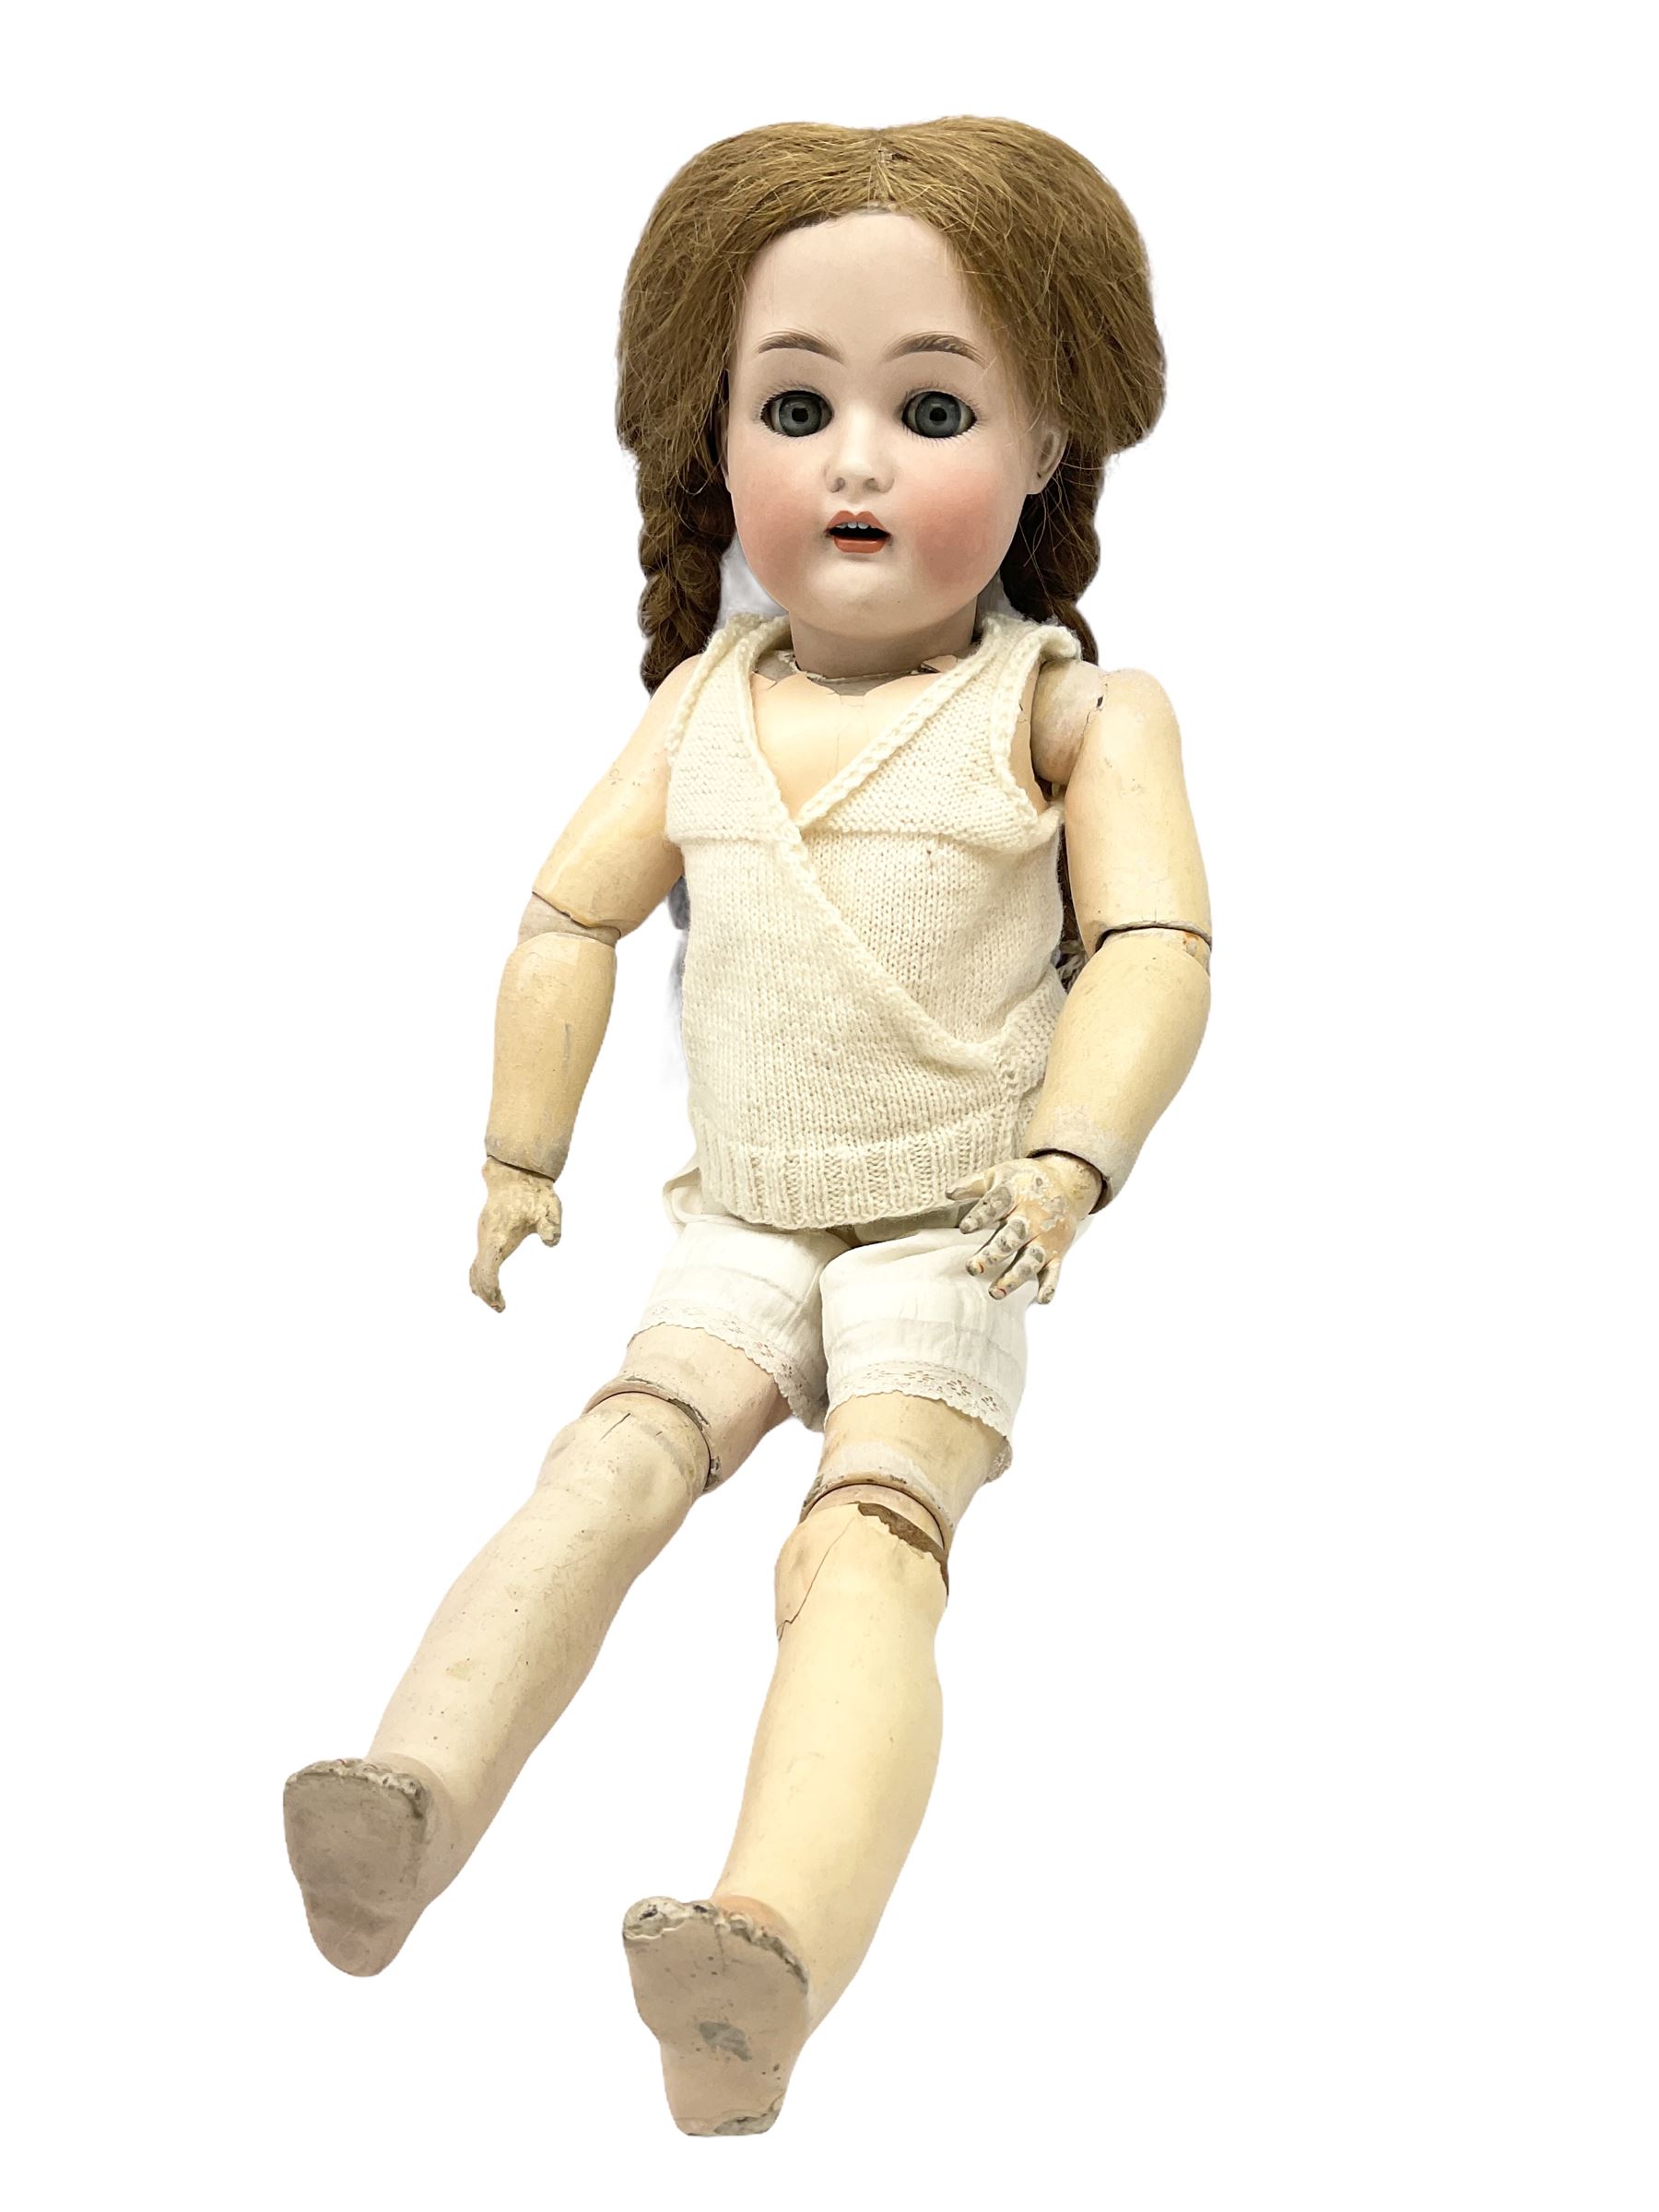 Simon & Halbig for Kammer & Reinhardt bisque head doll with applied hair - Image 6 of 11